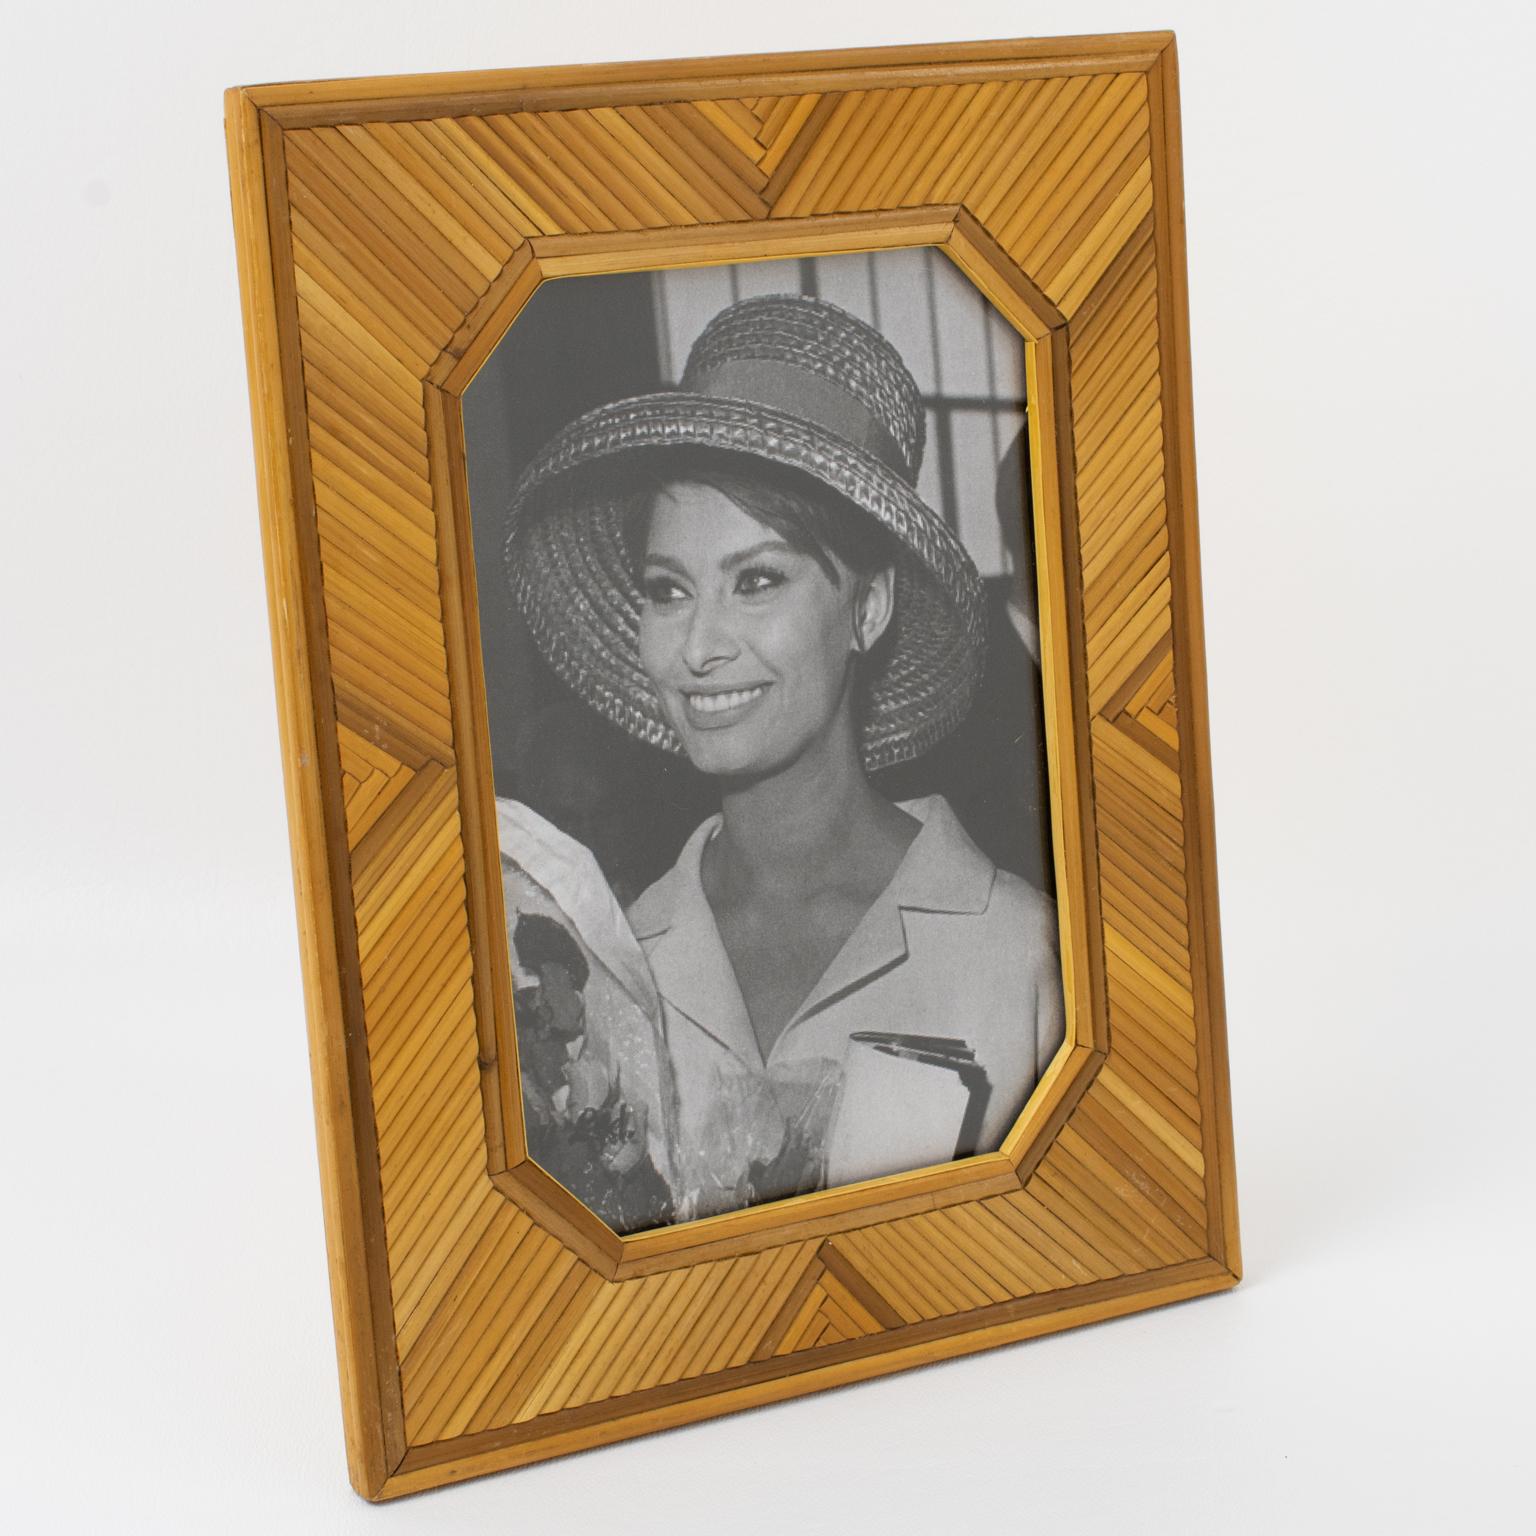 This exquisite photo frame with a straw marquetry design was crafted by hand in France during the 1950s. The frame features intricate geometric patterns made entirely of straw marquetry, including the back and easel. It is a top-quality decor piece